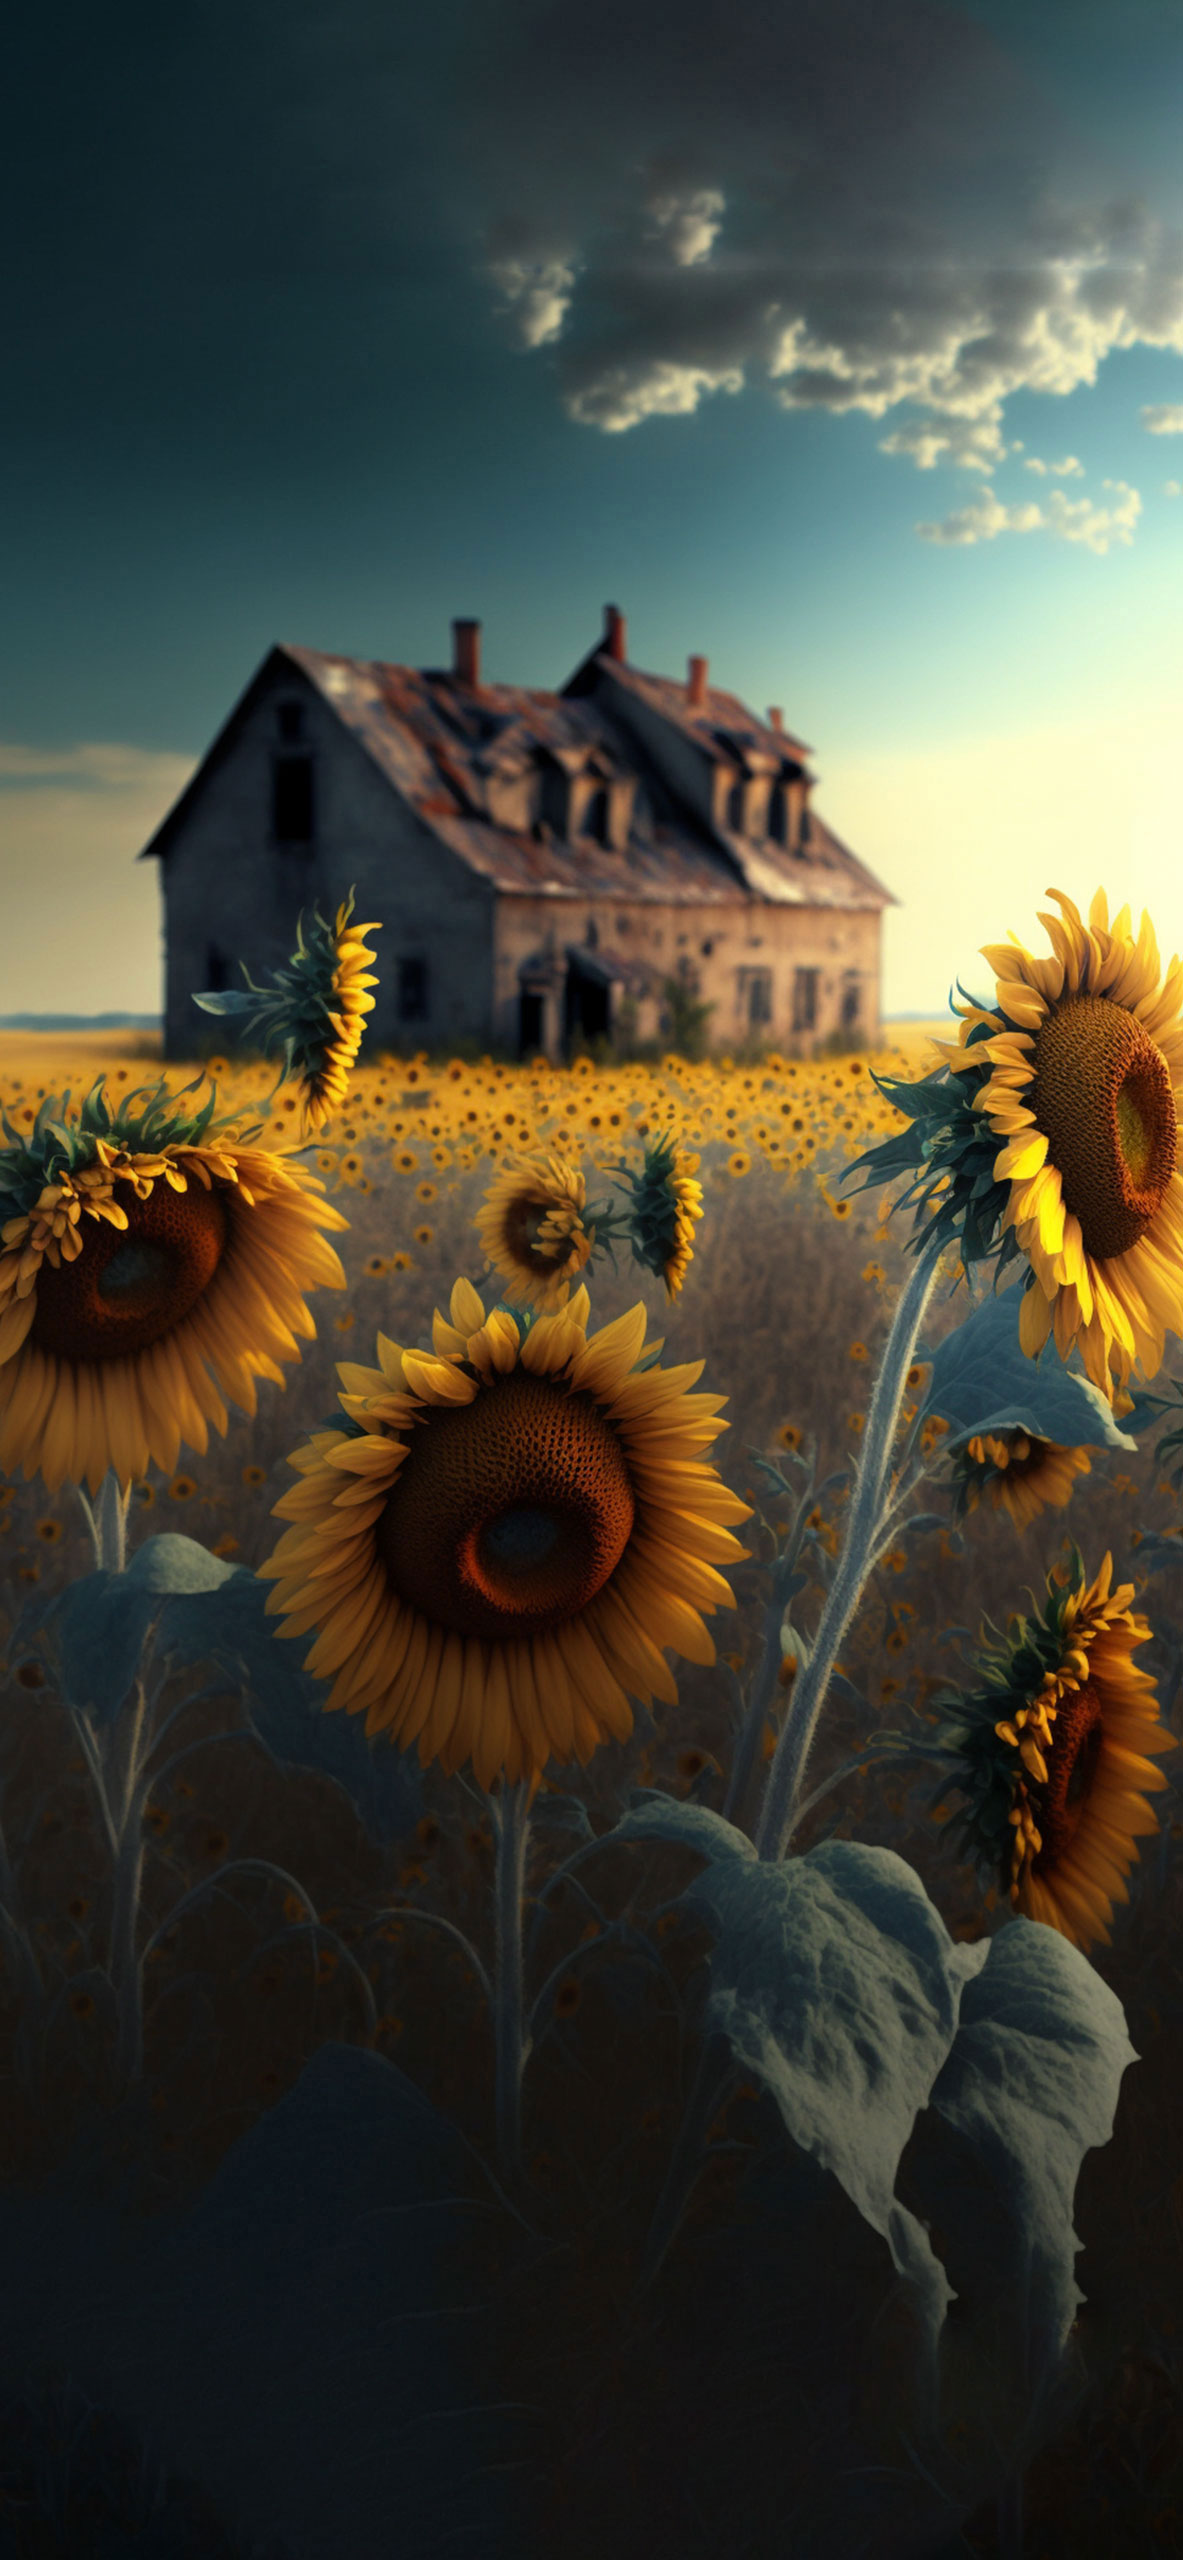 Sunflowers & Old House Wallpapers - Sunflower Wallpaper iPhone